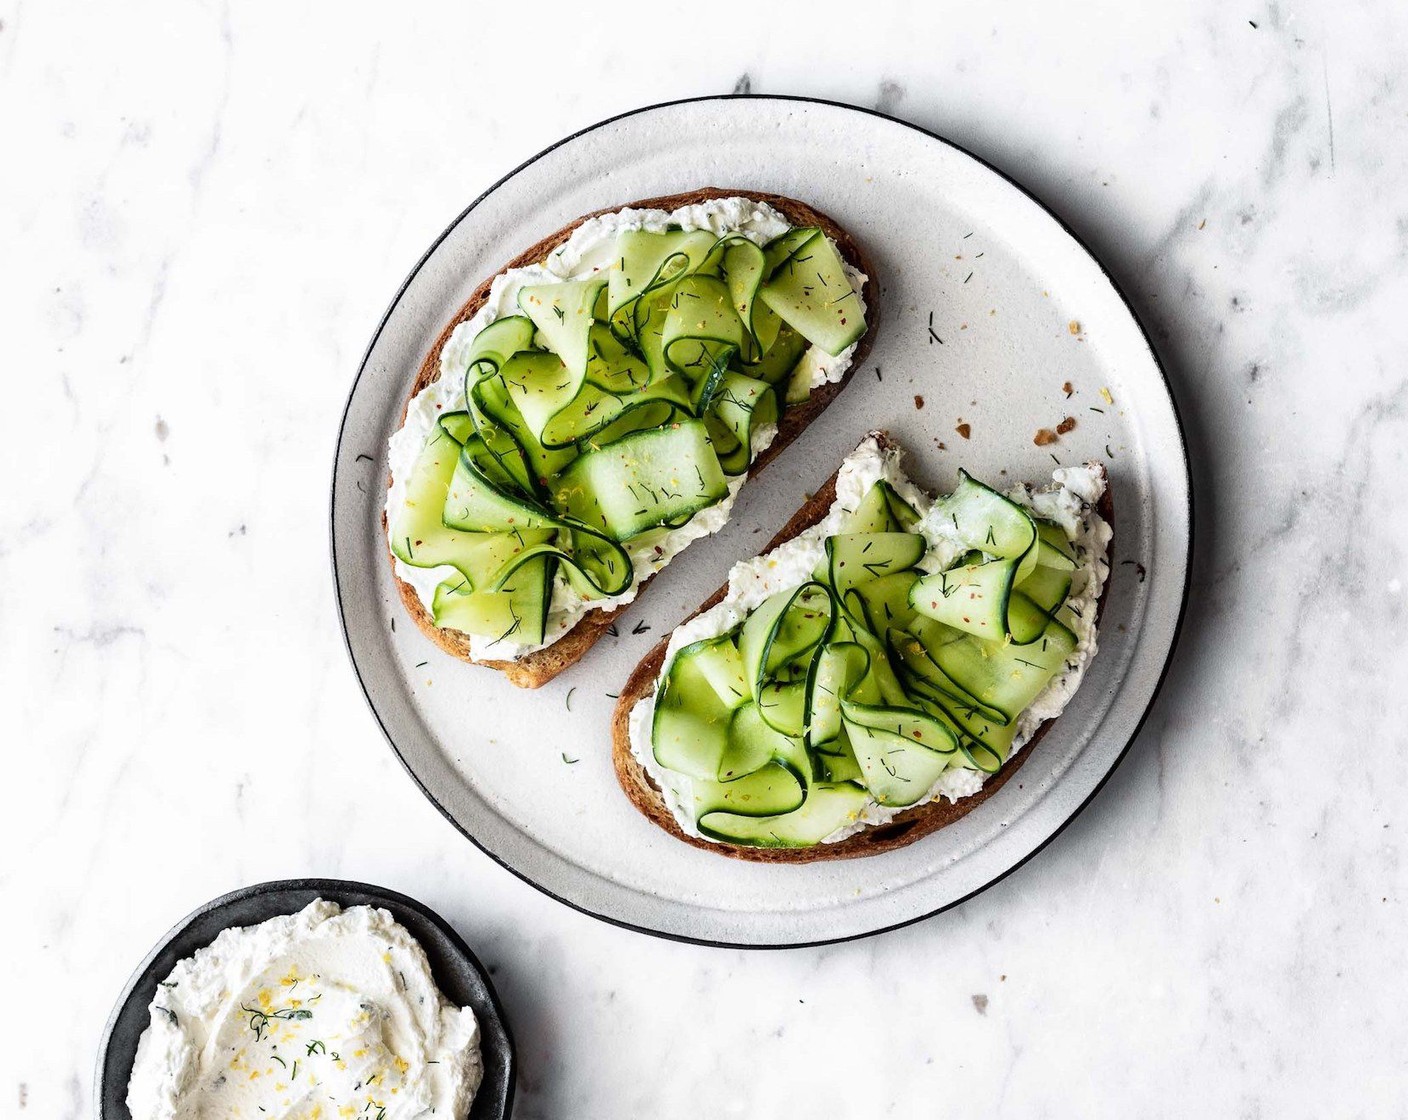 step 5 To serve: spread each slice of toast generously with the lemon herb labneh, top with shaved cucumber and sprinkle with a bit of Crushed Red Pepper Flakes (to taste), lemon zest and a touch of minced fresh herbs.